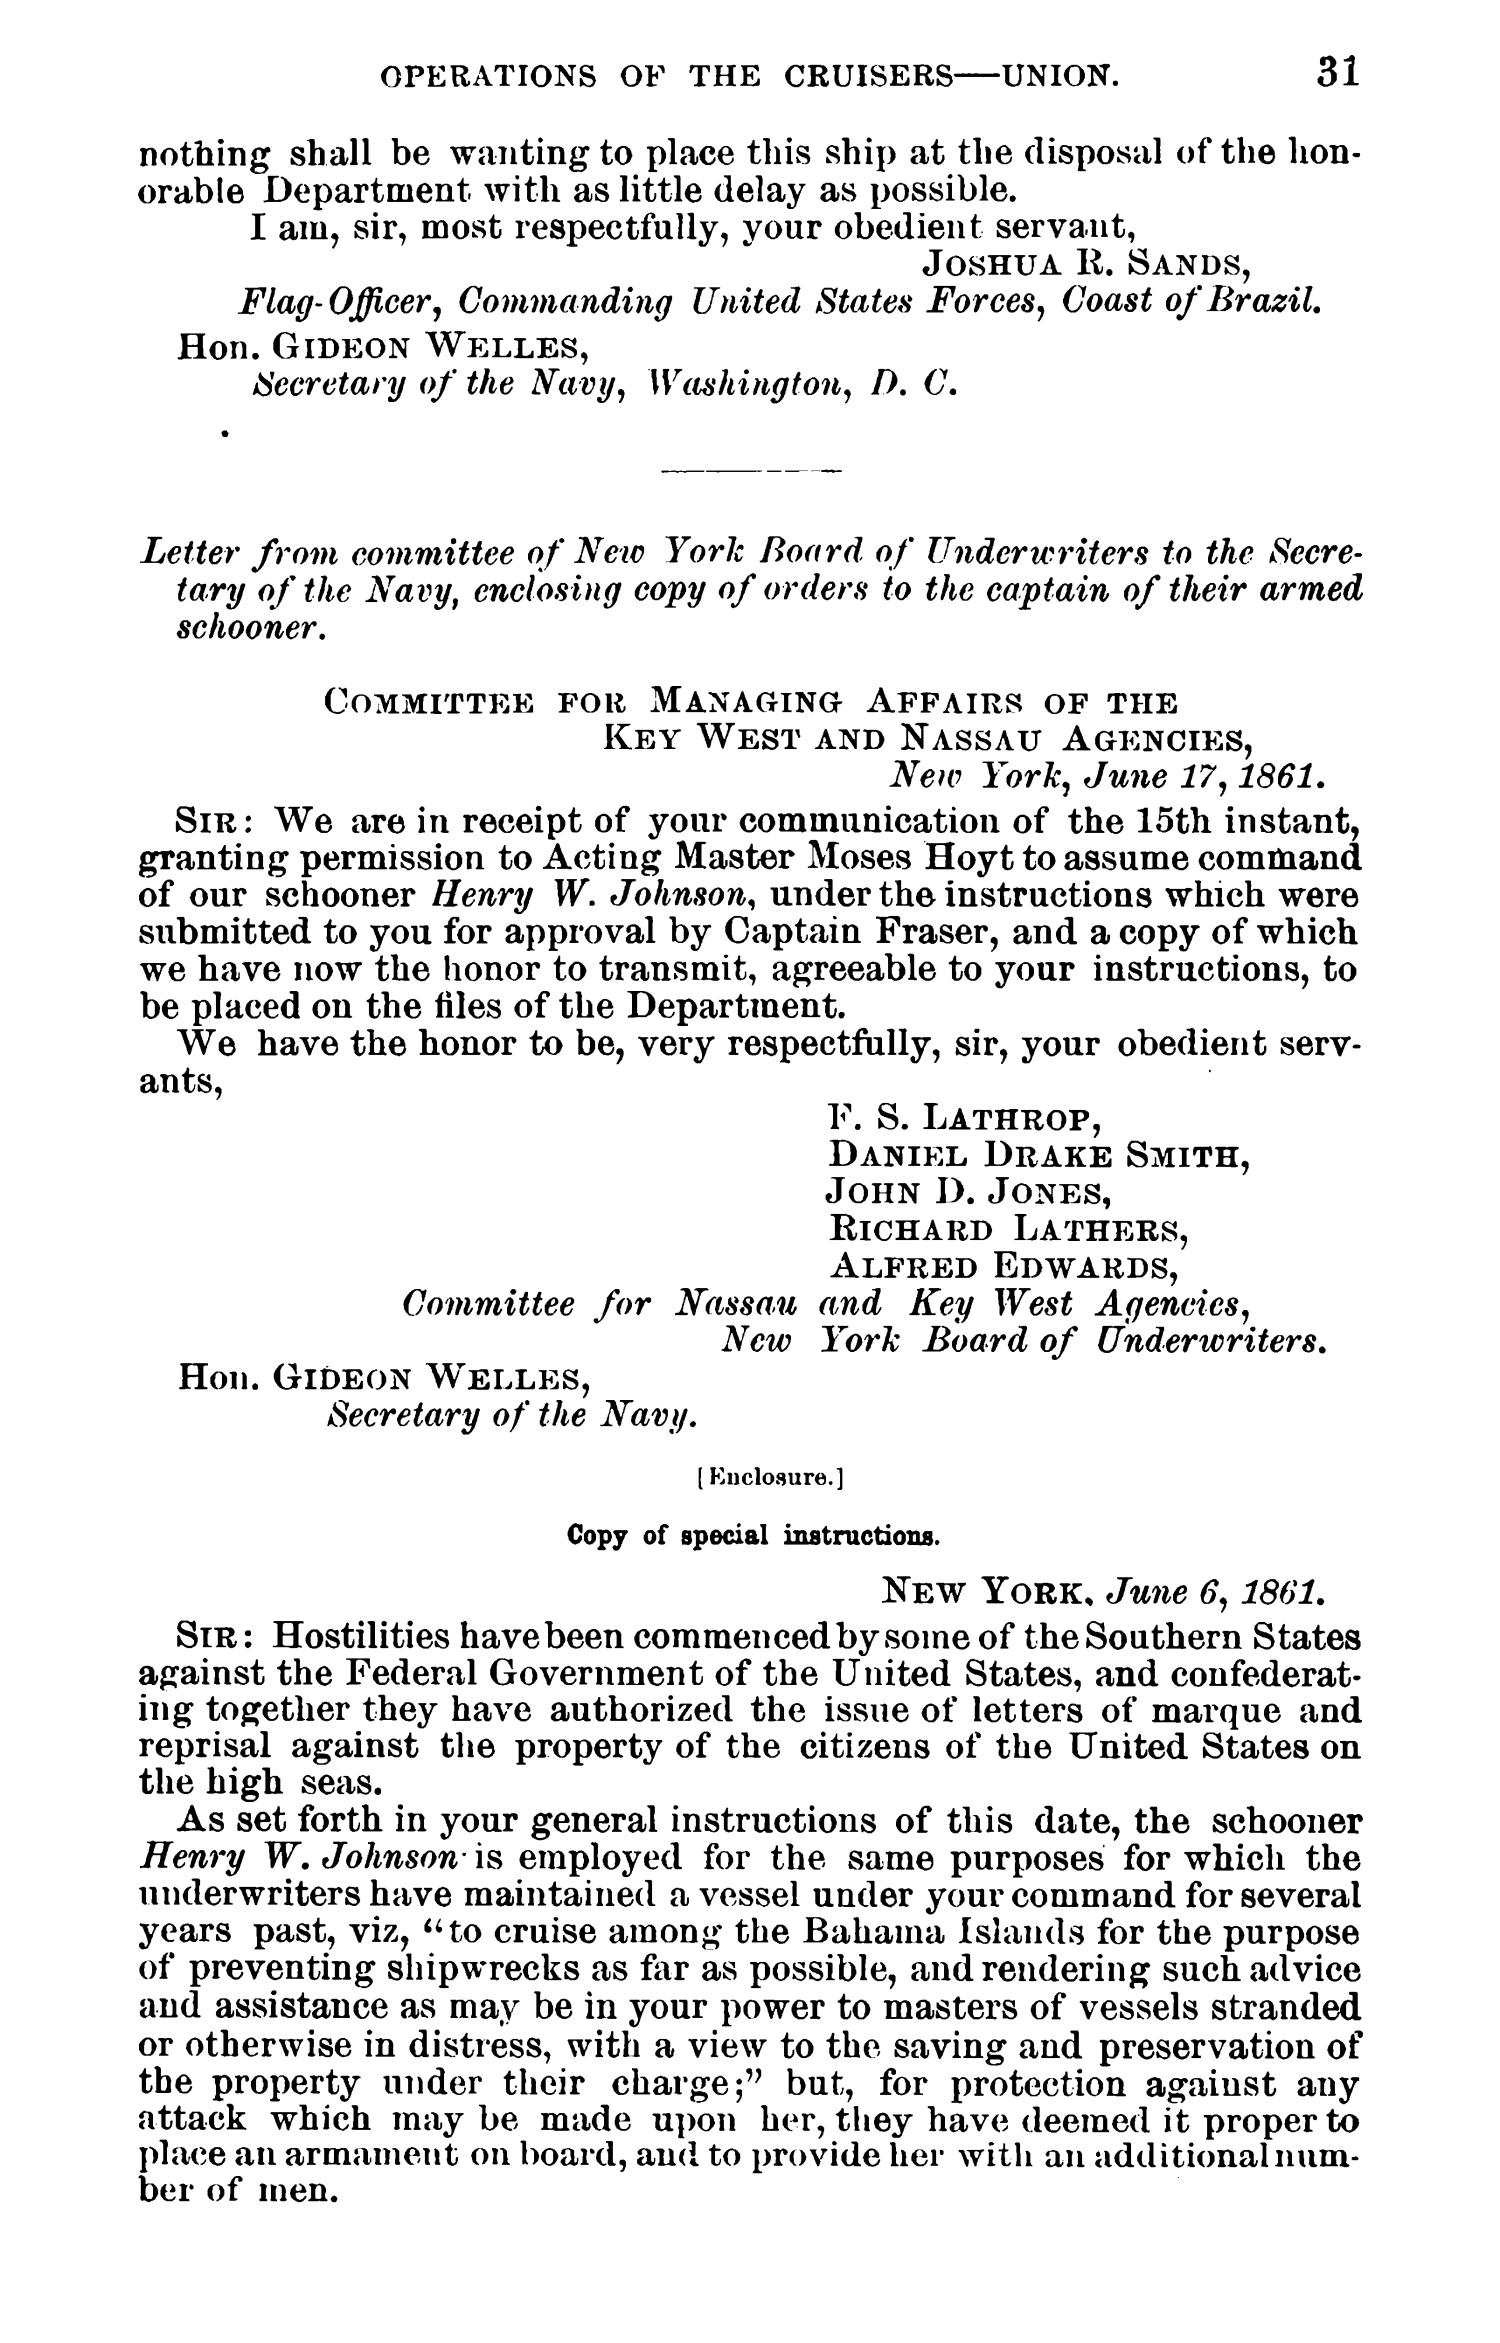 Official Records of the Union and Confederate Navies in the War of the Rebellion. Series 1, Volume 1.
                                                
                                                    31
                                                